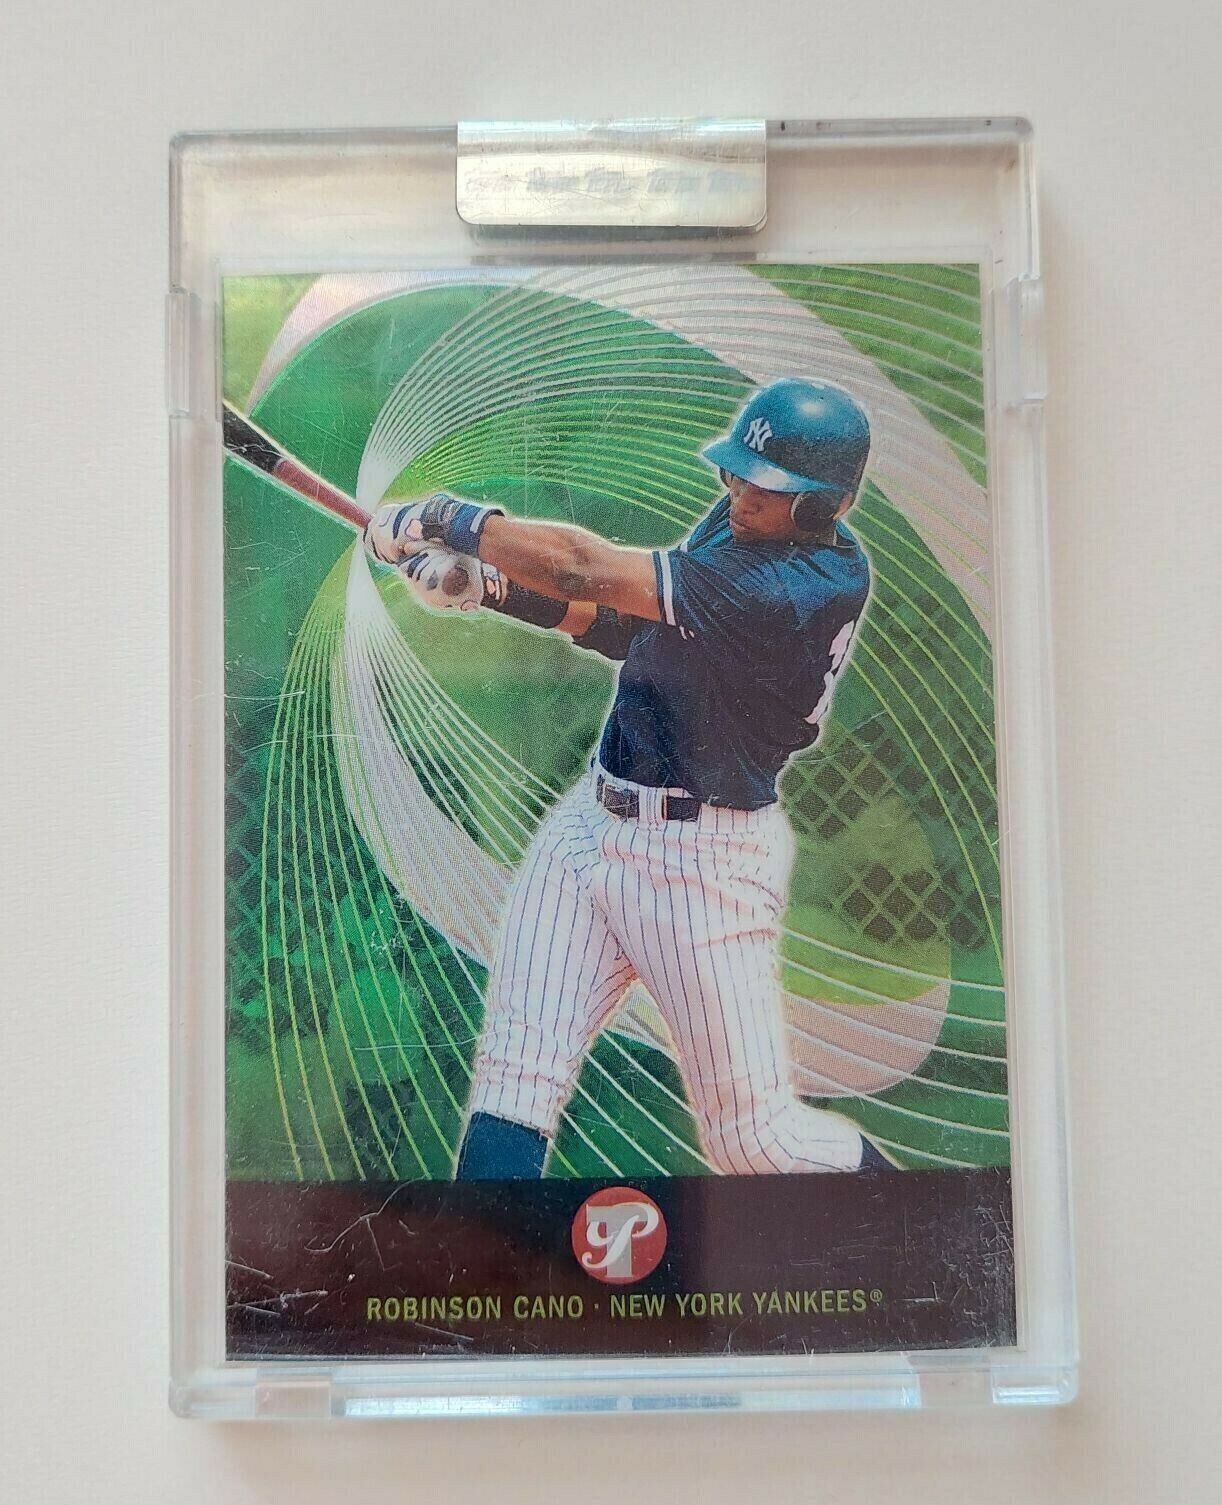 2003 Topps Pristine UNCIRCULATED RARE REFRACTOR Robinson Cano # 97/99 RC Card